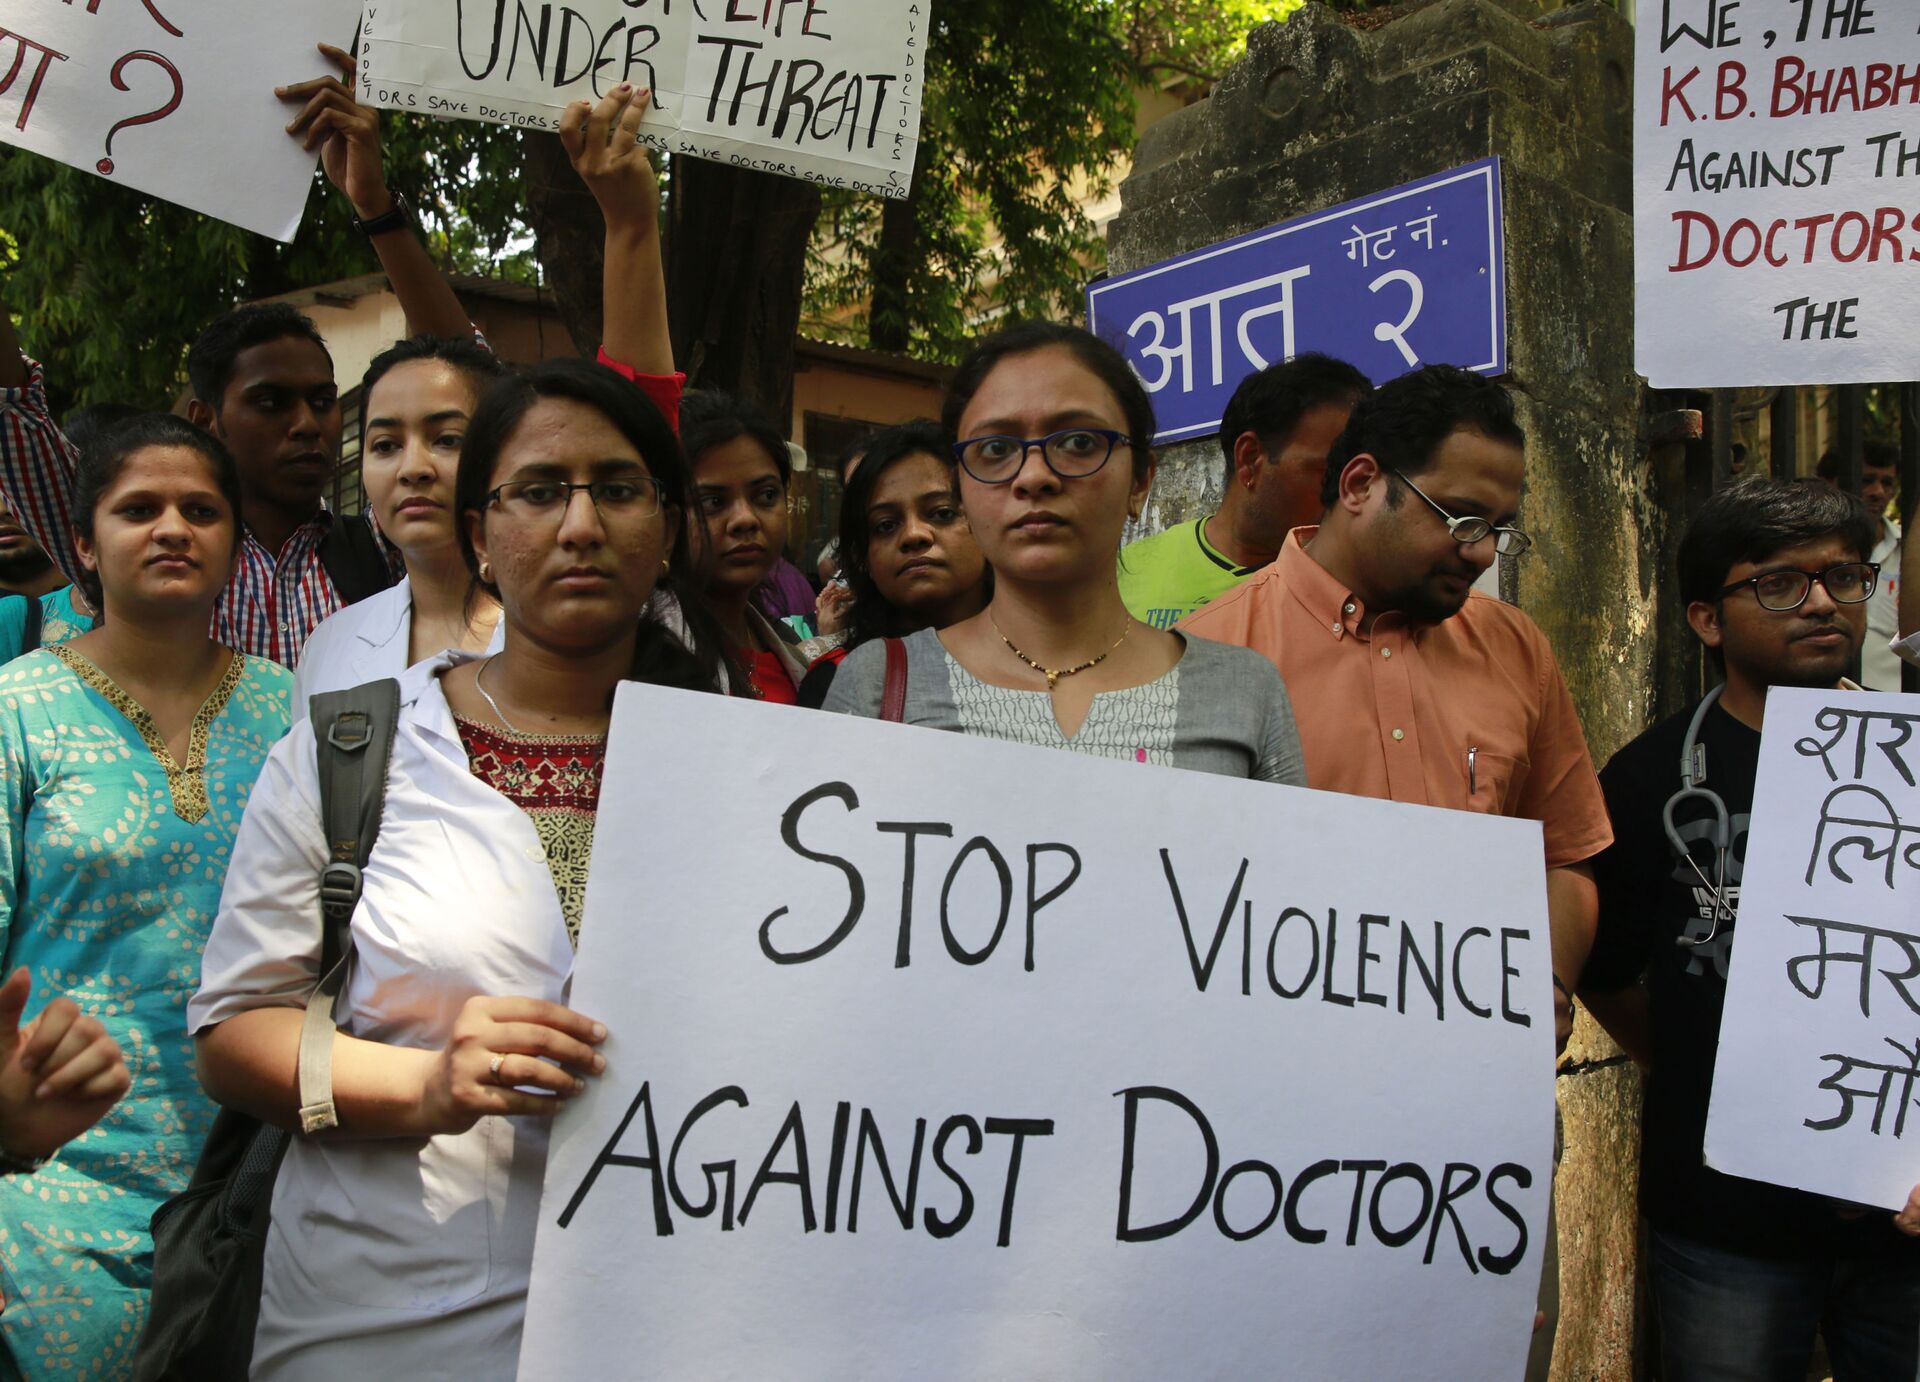 Cases of Violence Against Doctors and Healthcare Workers on a Rise in India - Sputnik International, 1920, 02.06.2021